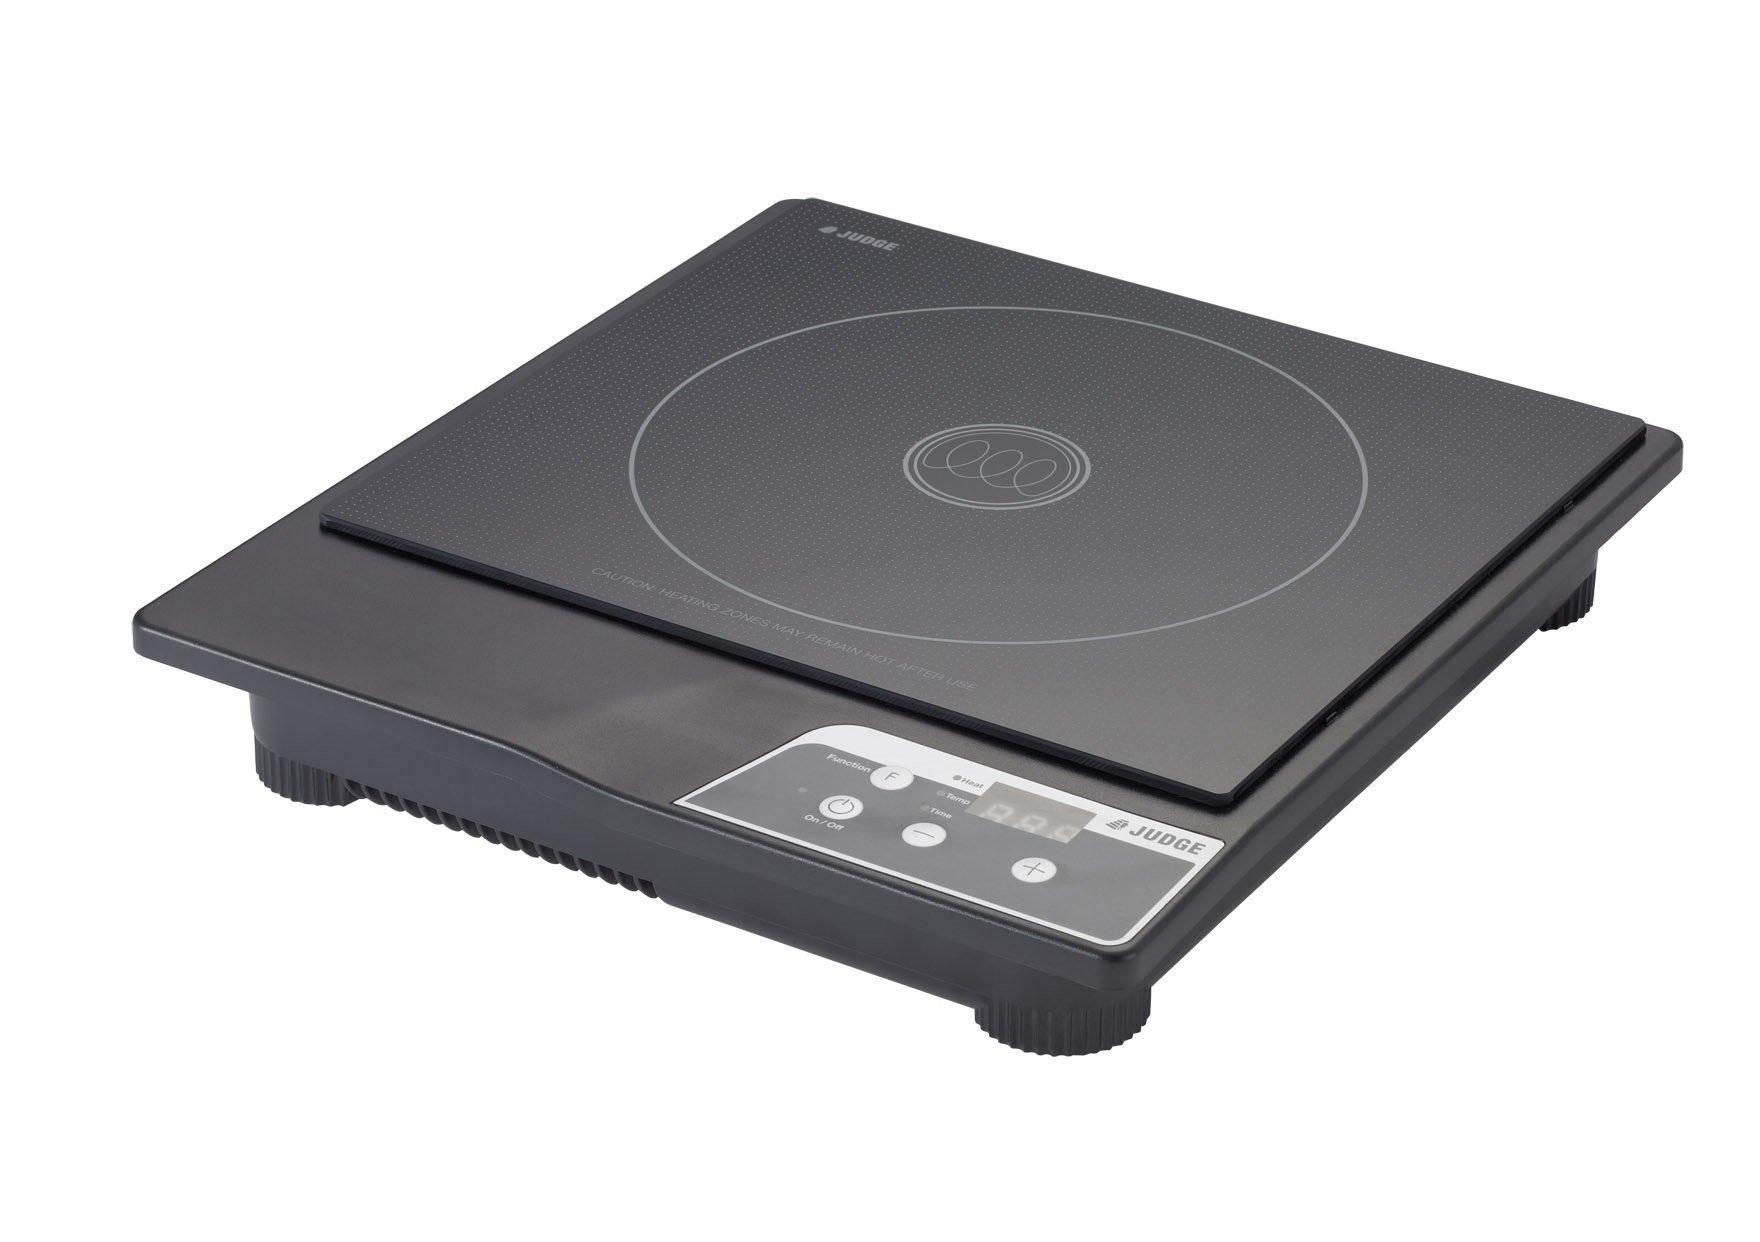 Judge Electricals Portable Induction Hob 1800W at Barnitts Online Store, UK | Barnitts